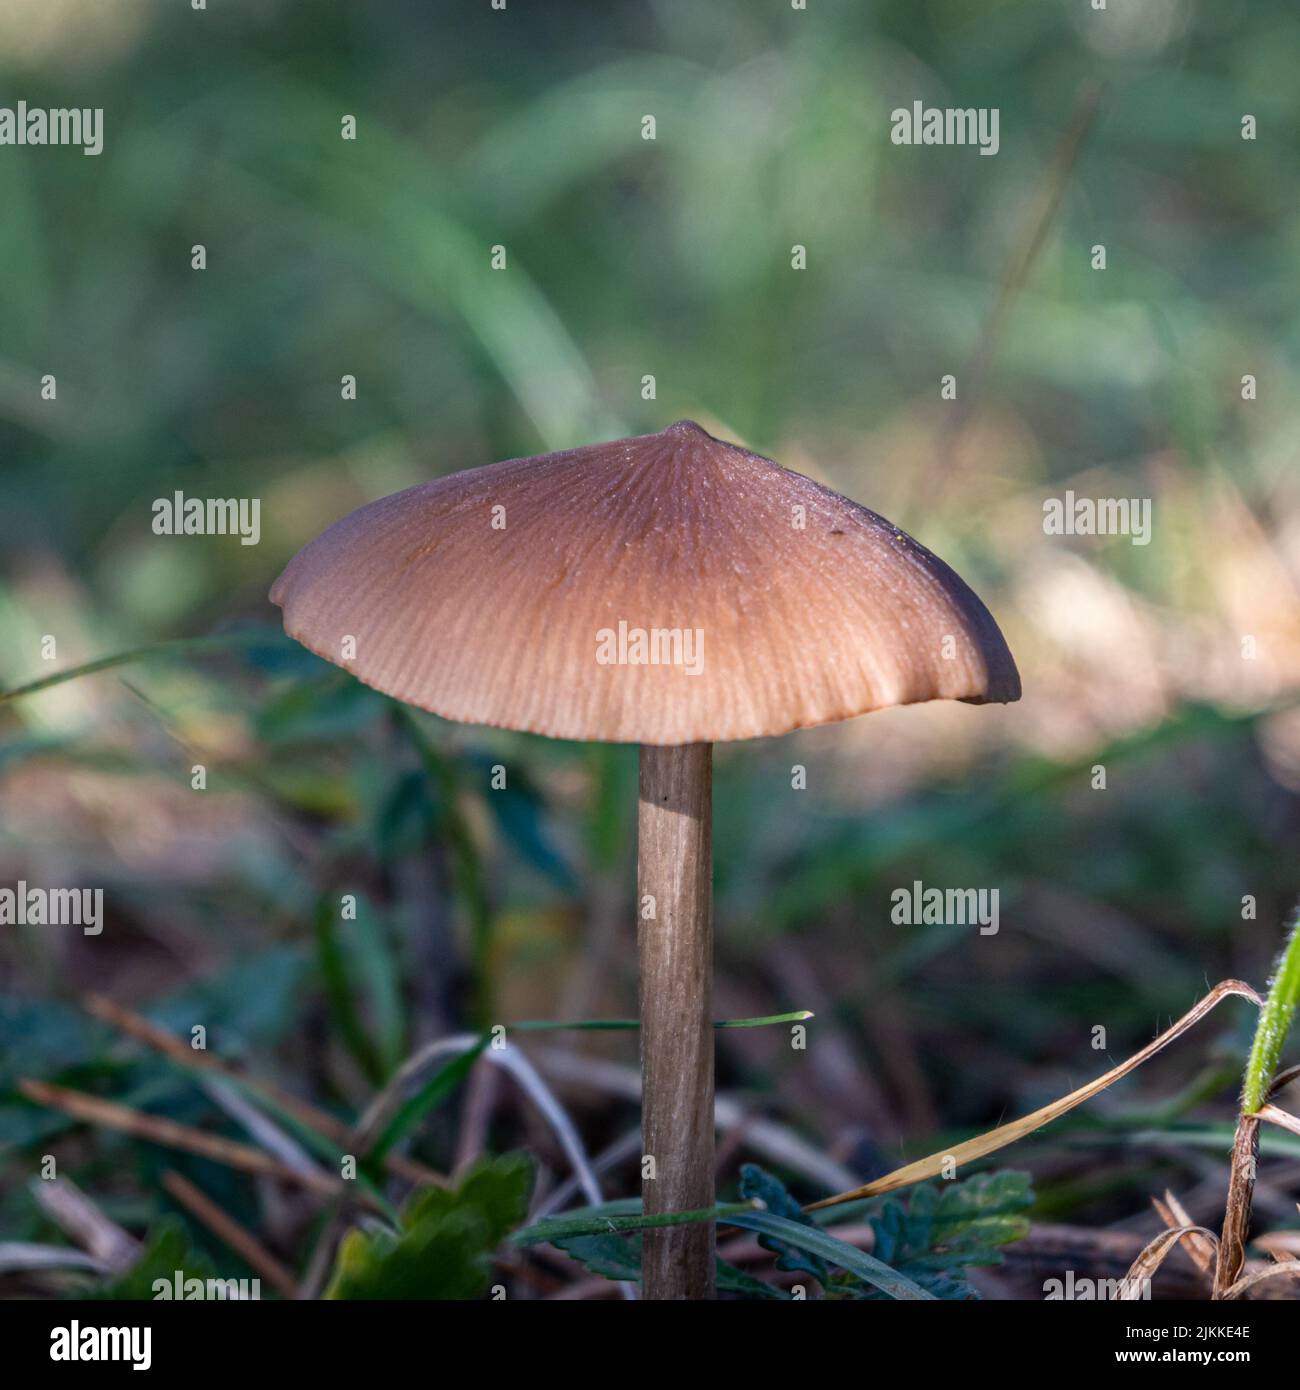 A closeup of an Entoloma mushroom growing in a forest or park on a grassy ground Stock Photo